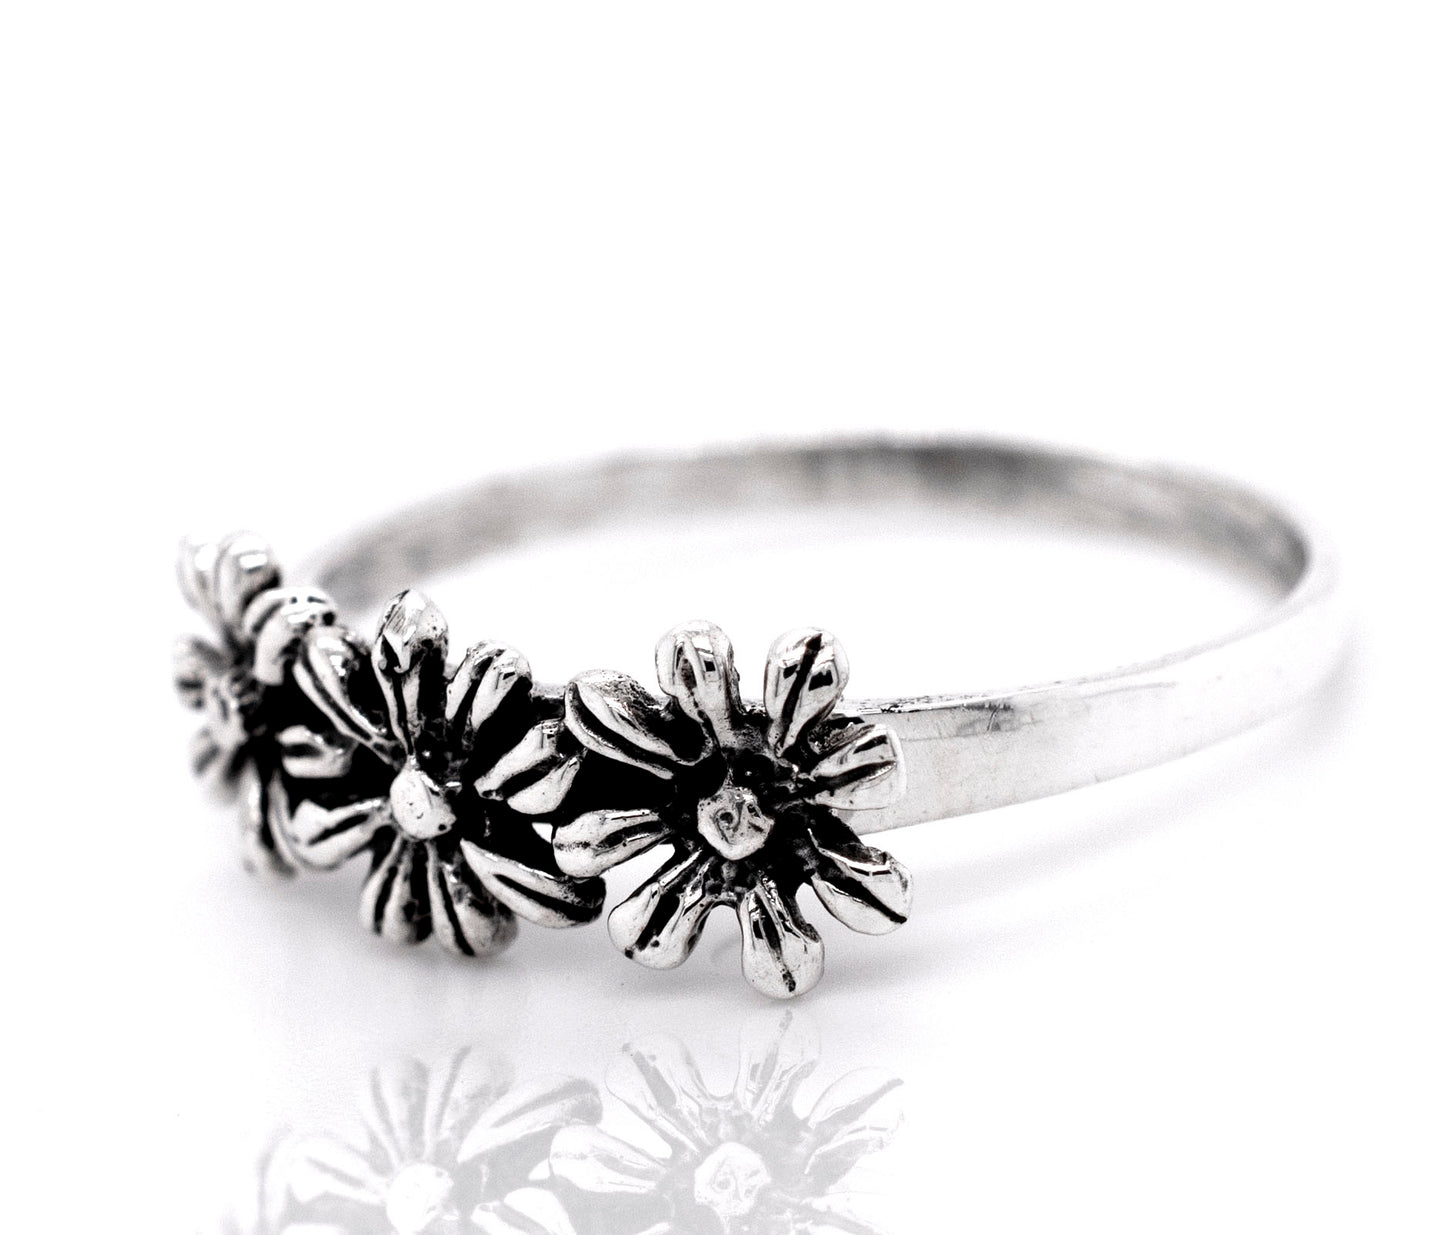 Dainty Three Flowers Design Ring with a floral design.